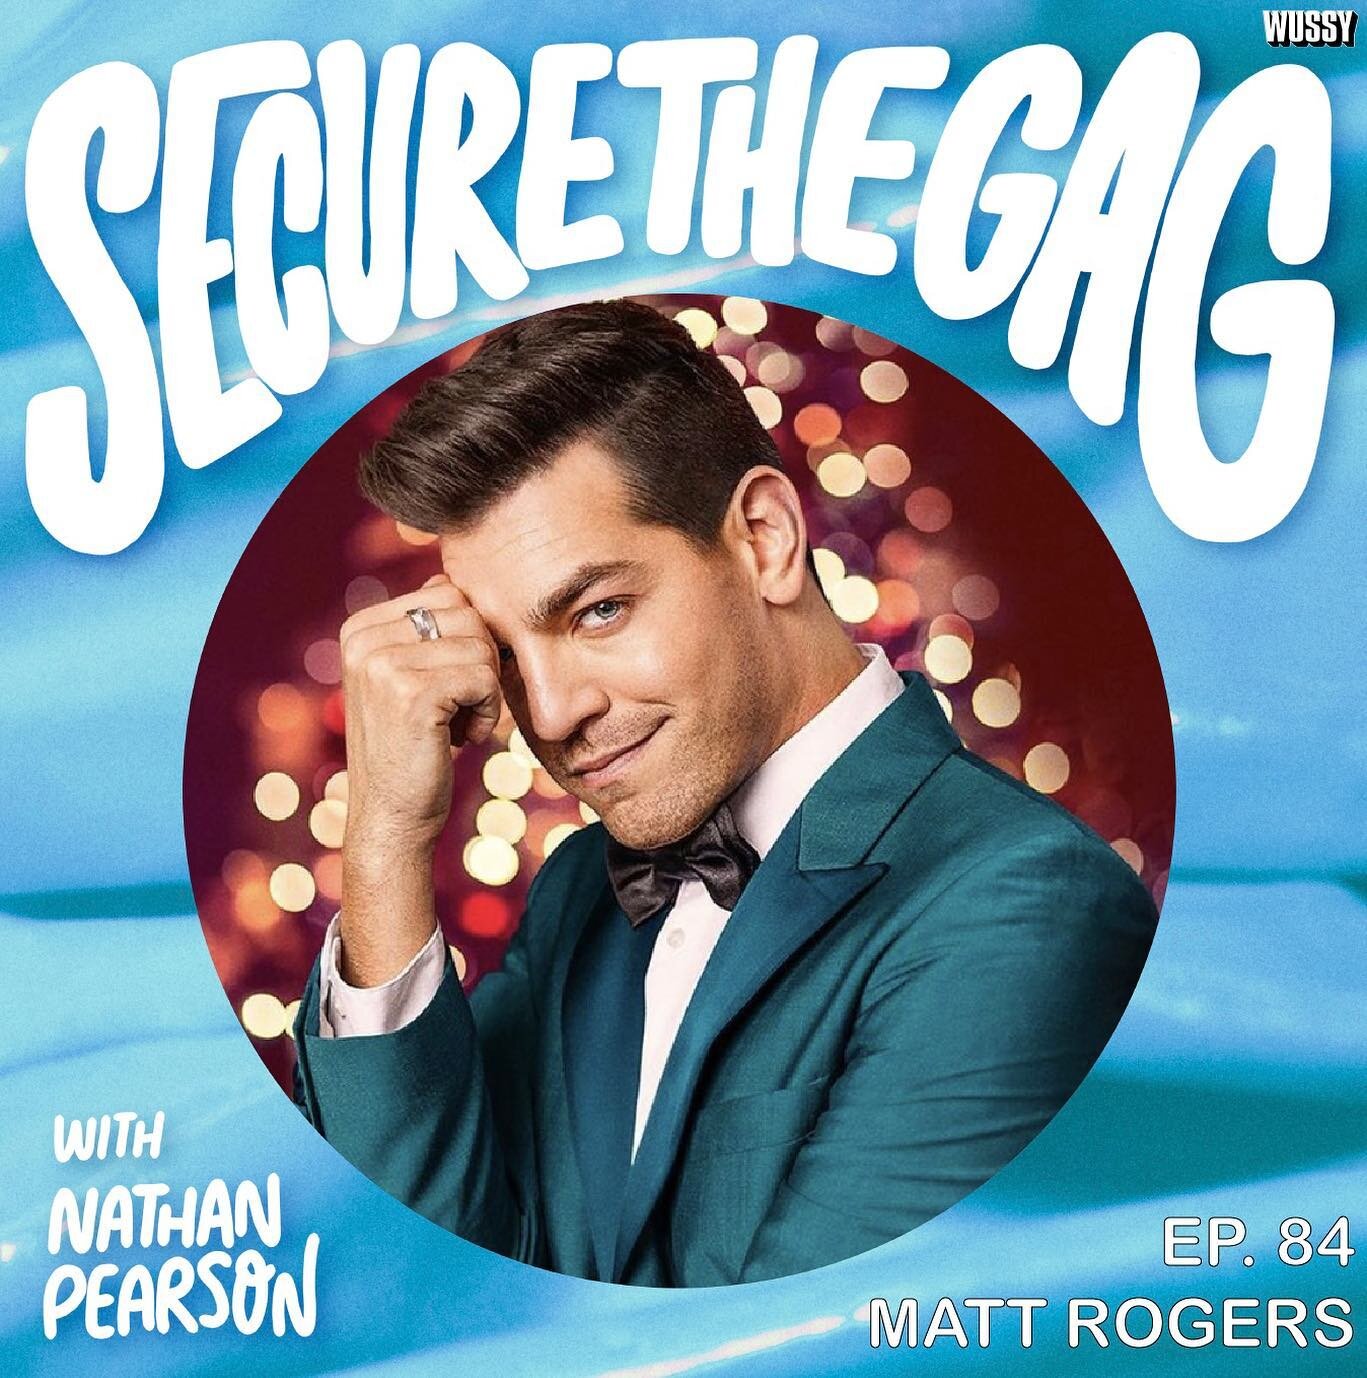 Have You Heard of Christmas?! 🎄Secure The Gag is honored to have as a guest this week the holiday pop diva, actress AND star, Matt Rogers! 🎄 Listen wherever you pod for a deep dive into Matt&rsquo;s comedic and Christmas inspirations! (Yes, we&rsqu